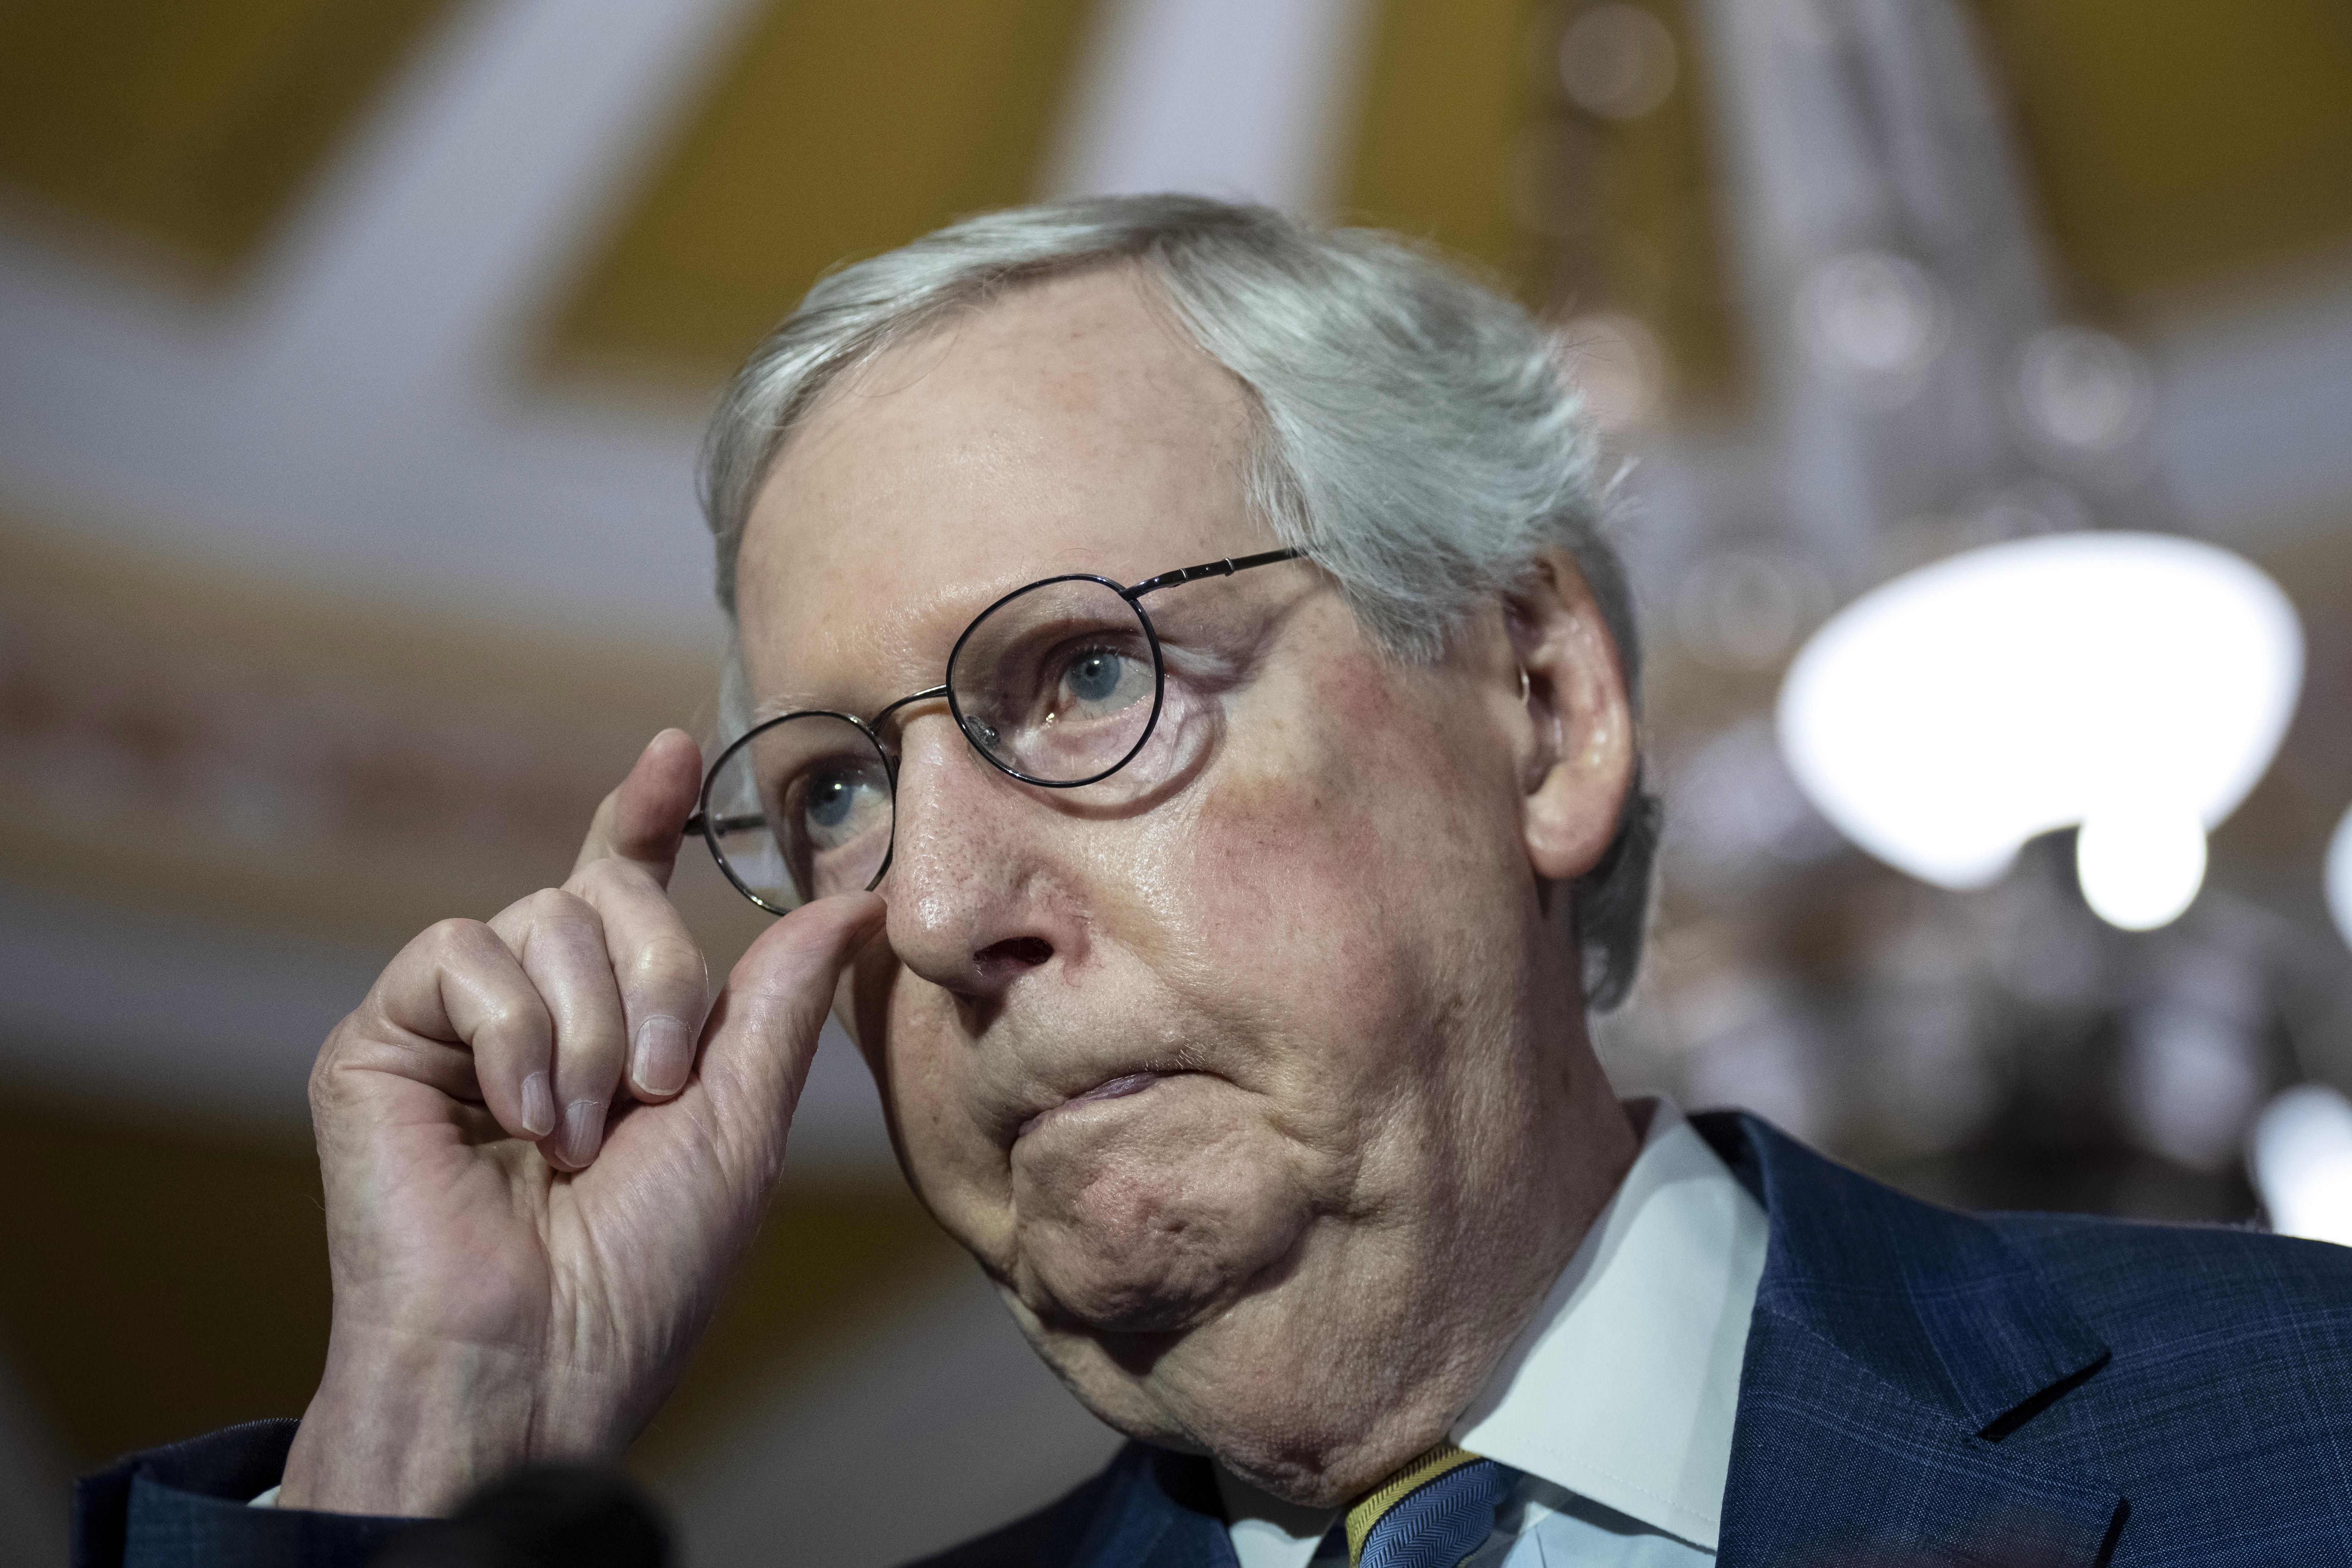 McConnell grabs onto his glasses.